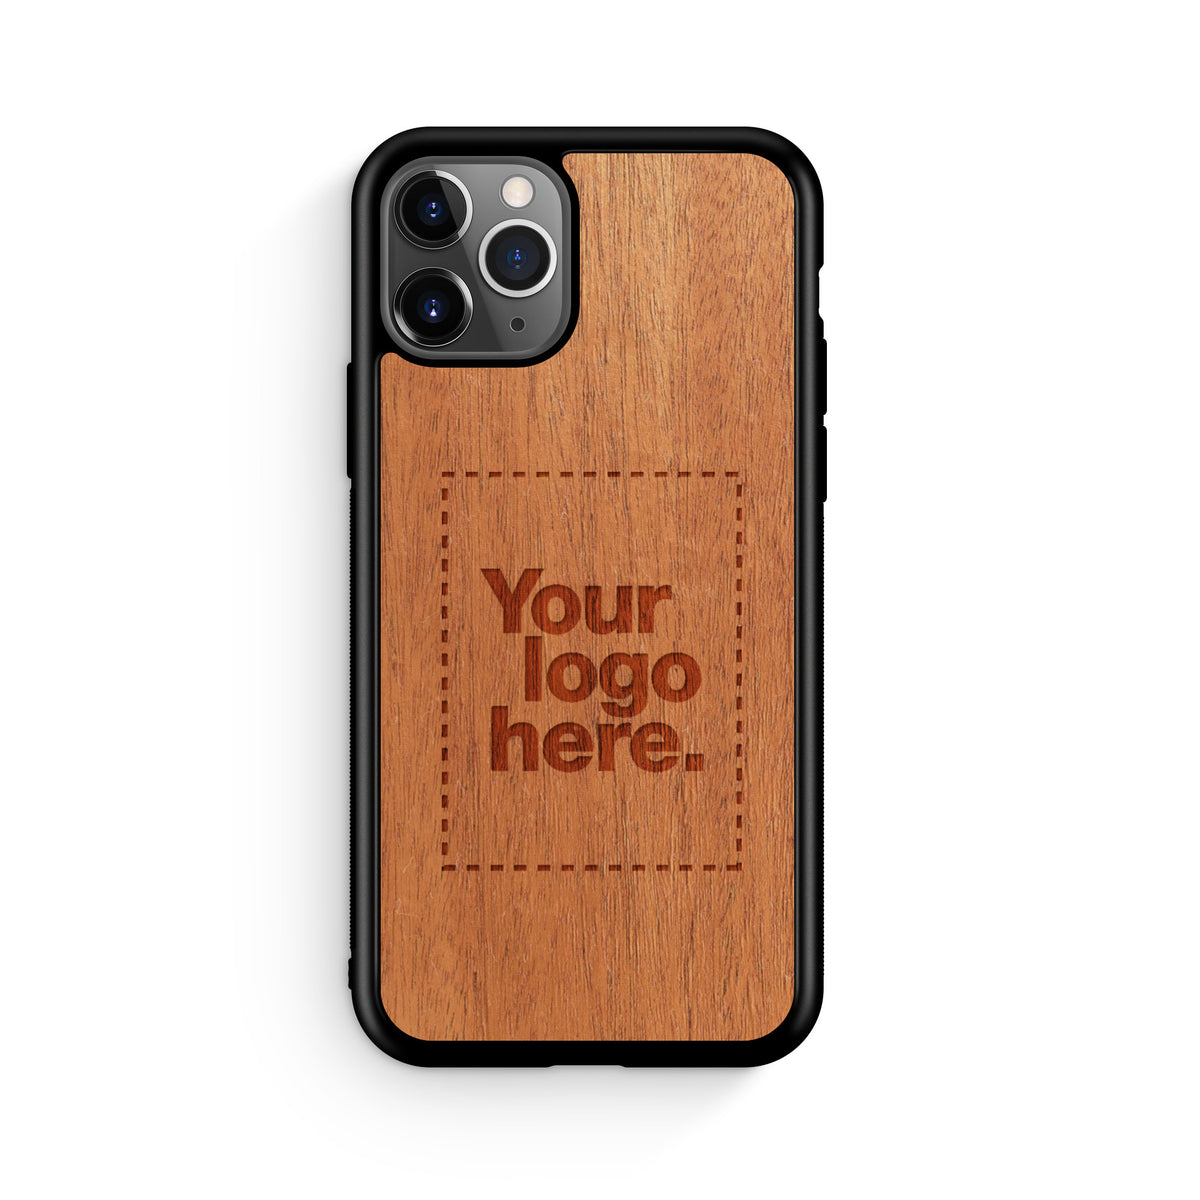 Custom customized personalized laser engraved wooden Apple iPhone 11 Pro (5.8